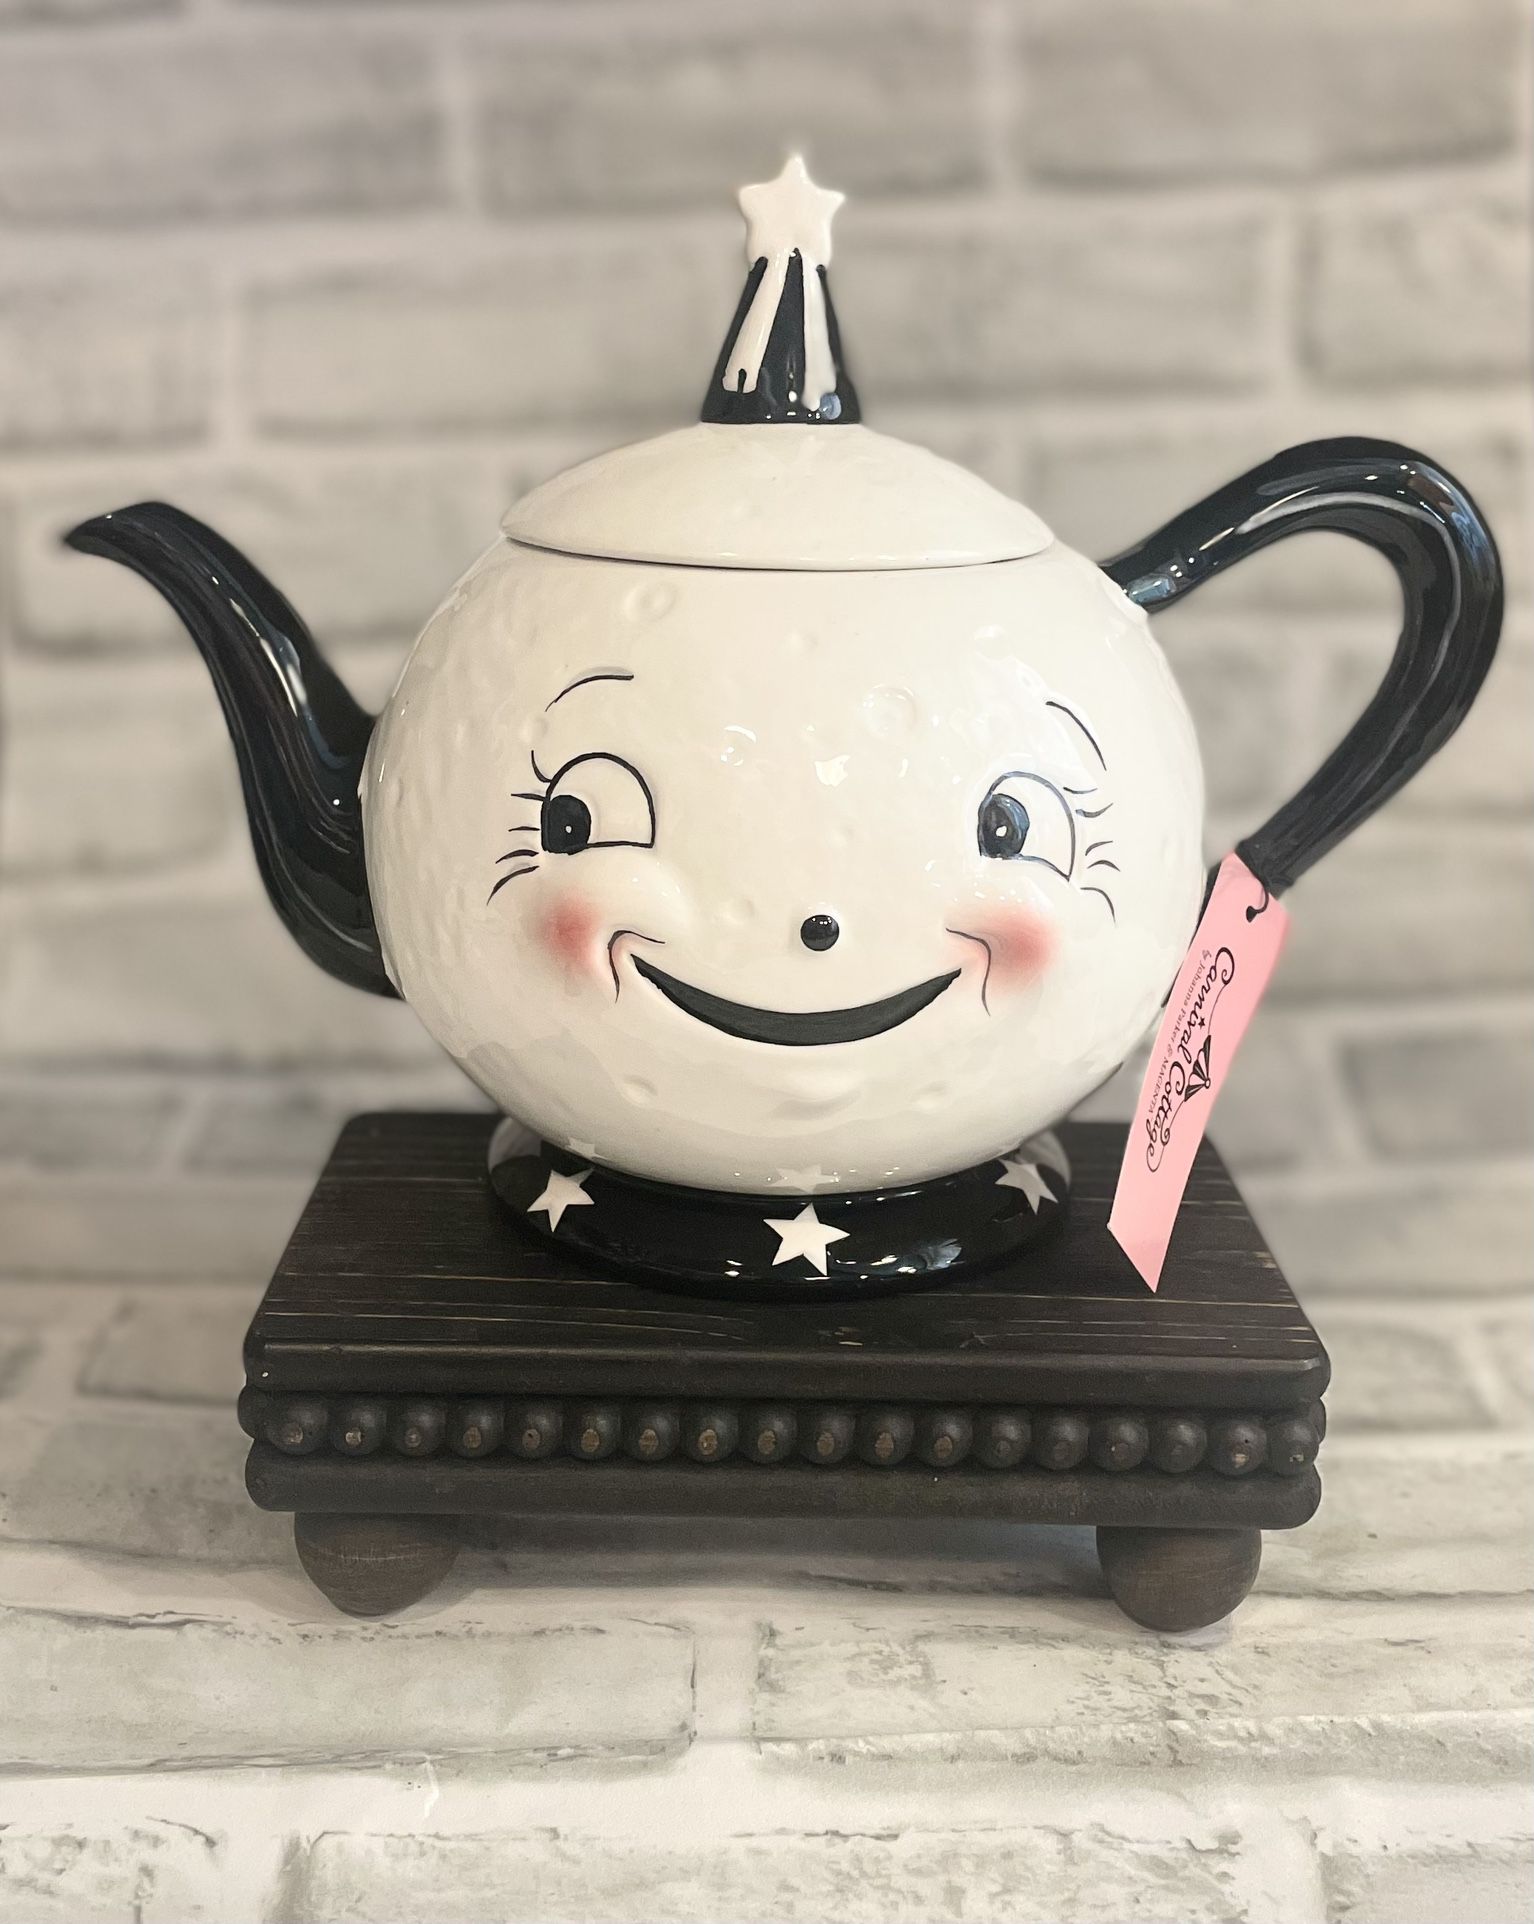 OXO Uplift Tea Kettle for Sale in Rancho Cucamonga, CA - OfferUp